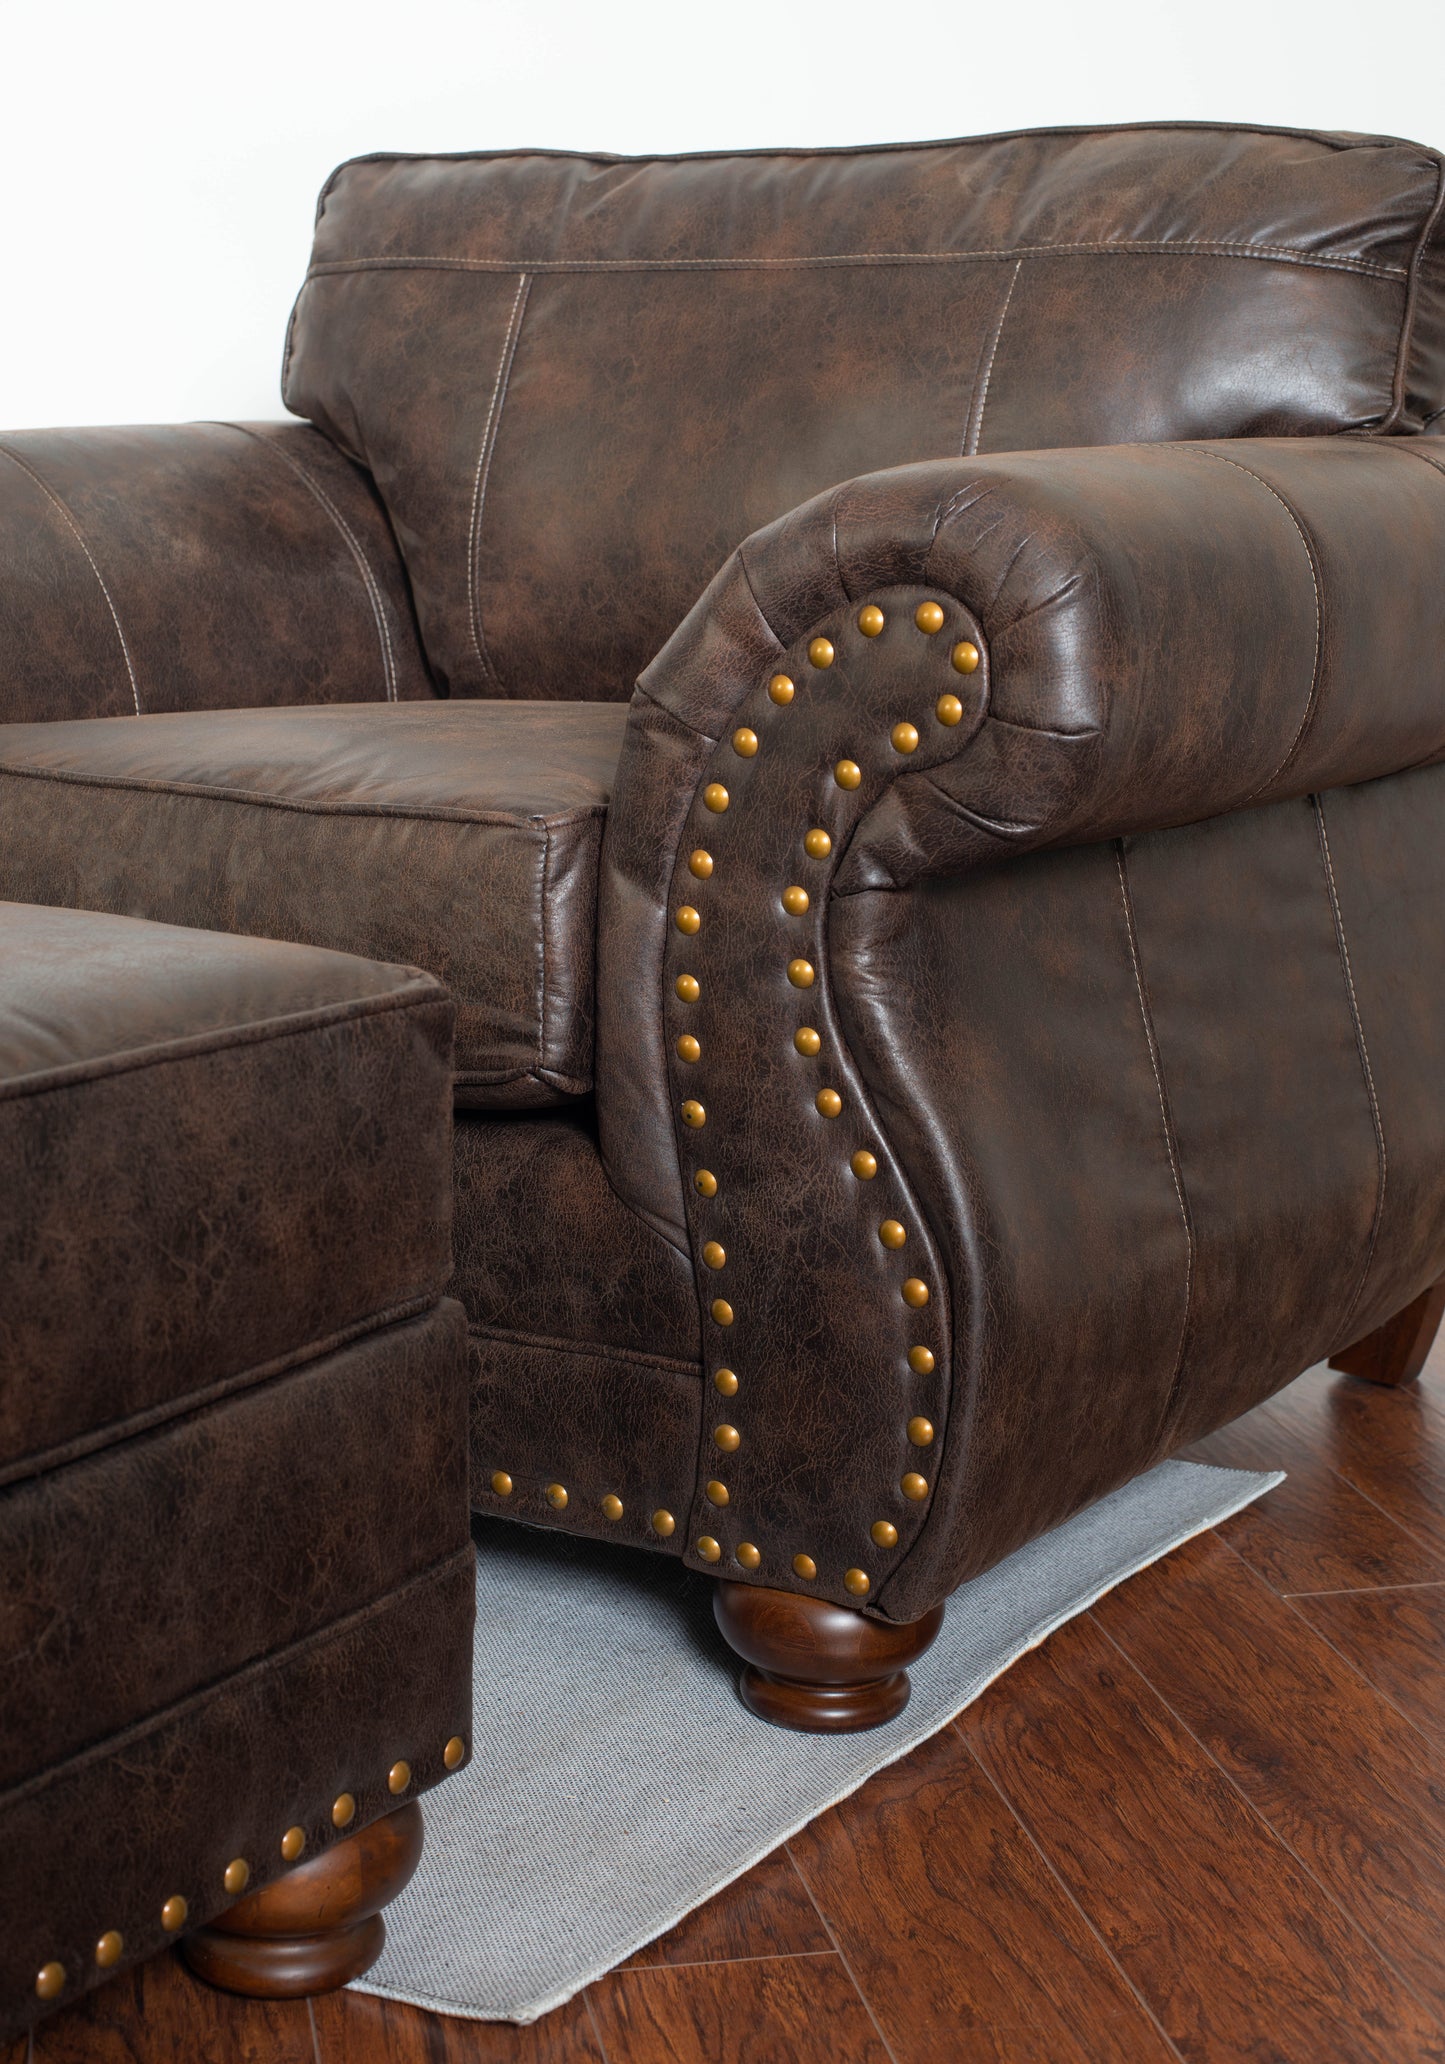 Leinster Faux Leather Upholstered Nailhead Chair and Ottoman in Espresso